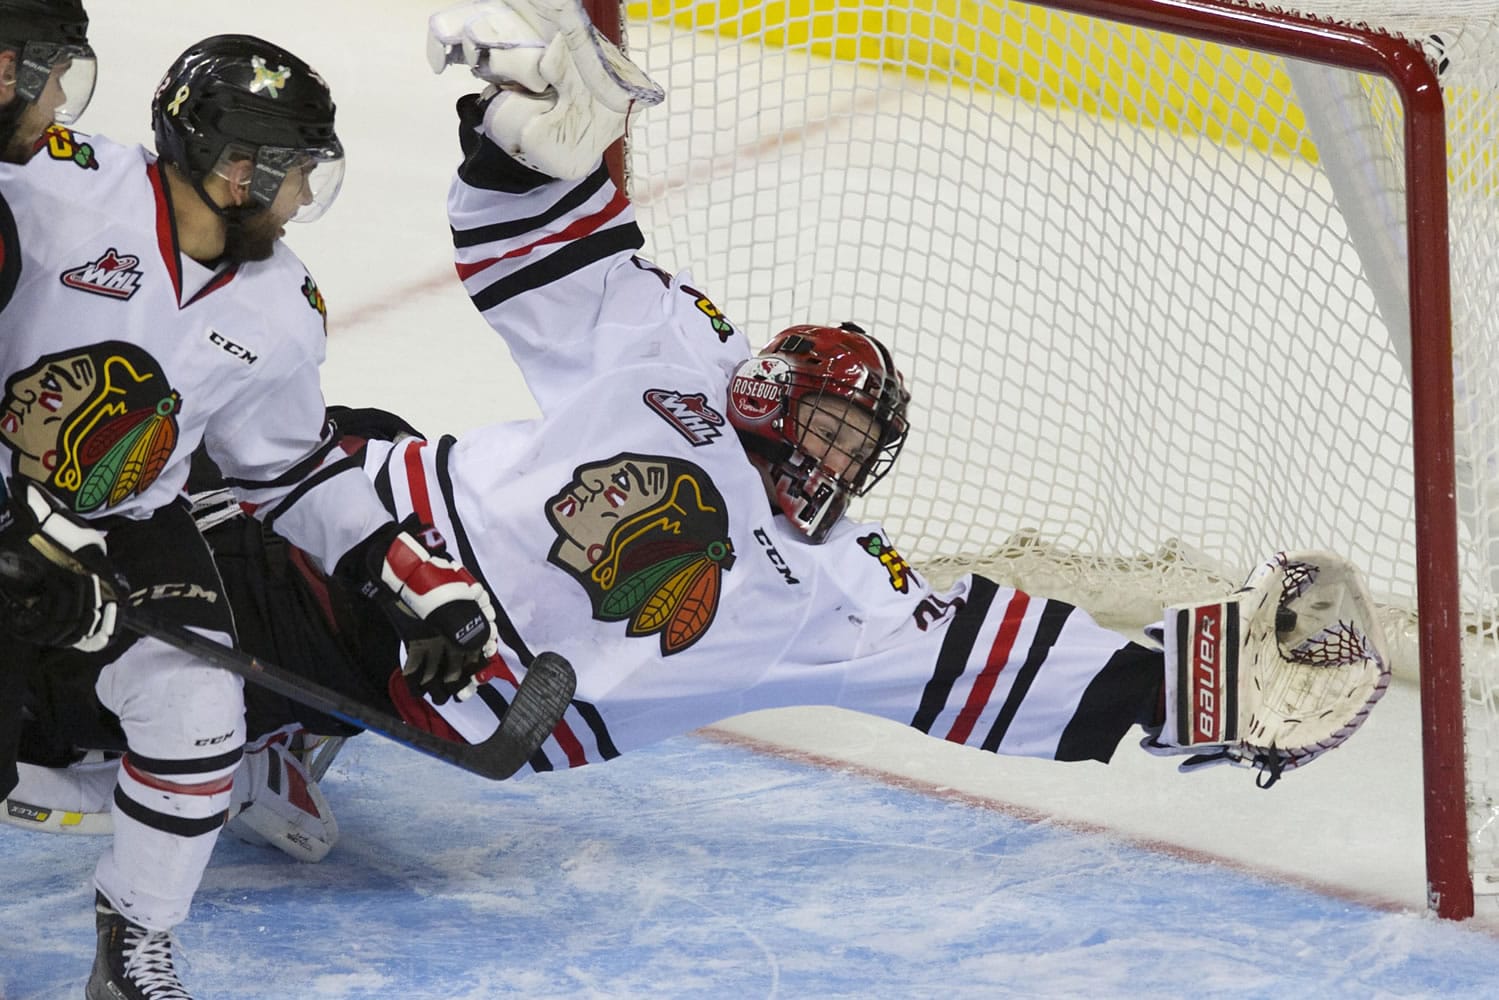 Portland goaltender Adin Hill makes a save that is later ruled a goal as the Portland Winterhawks take on the Kelowna Rockets at the Moda Center, Tuesday, April 28, 2015.